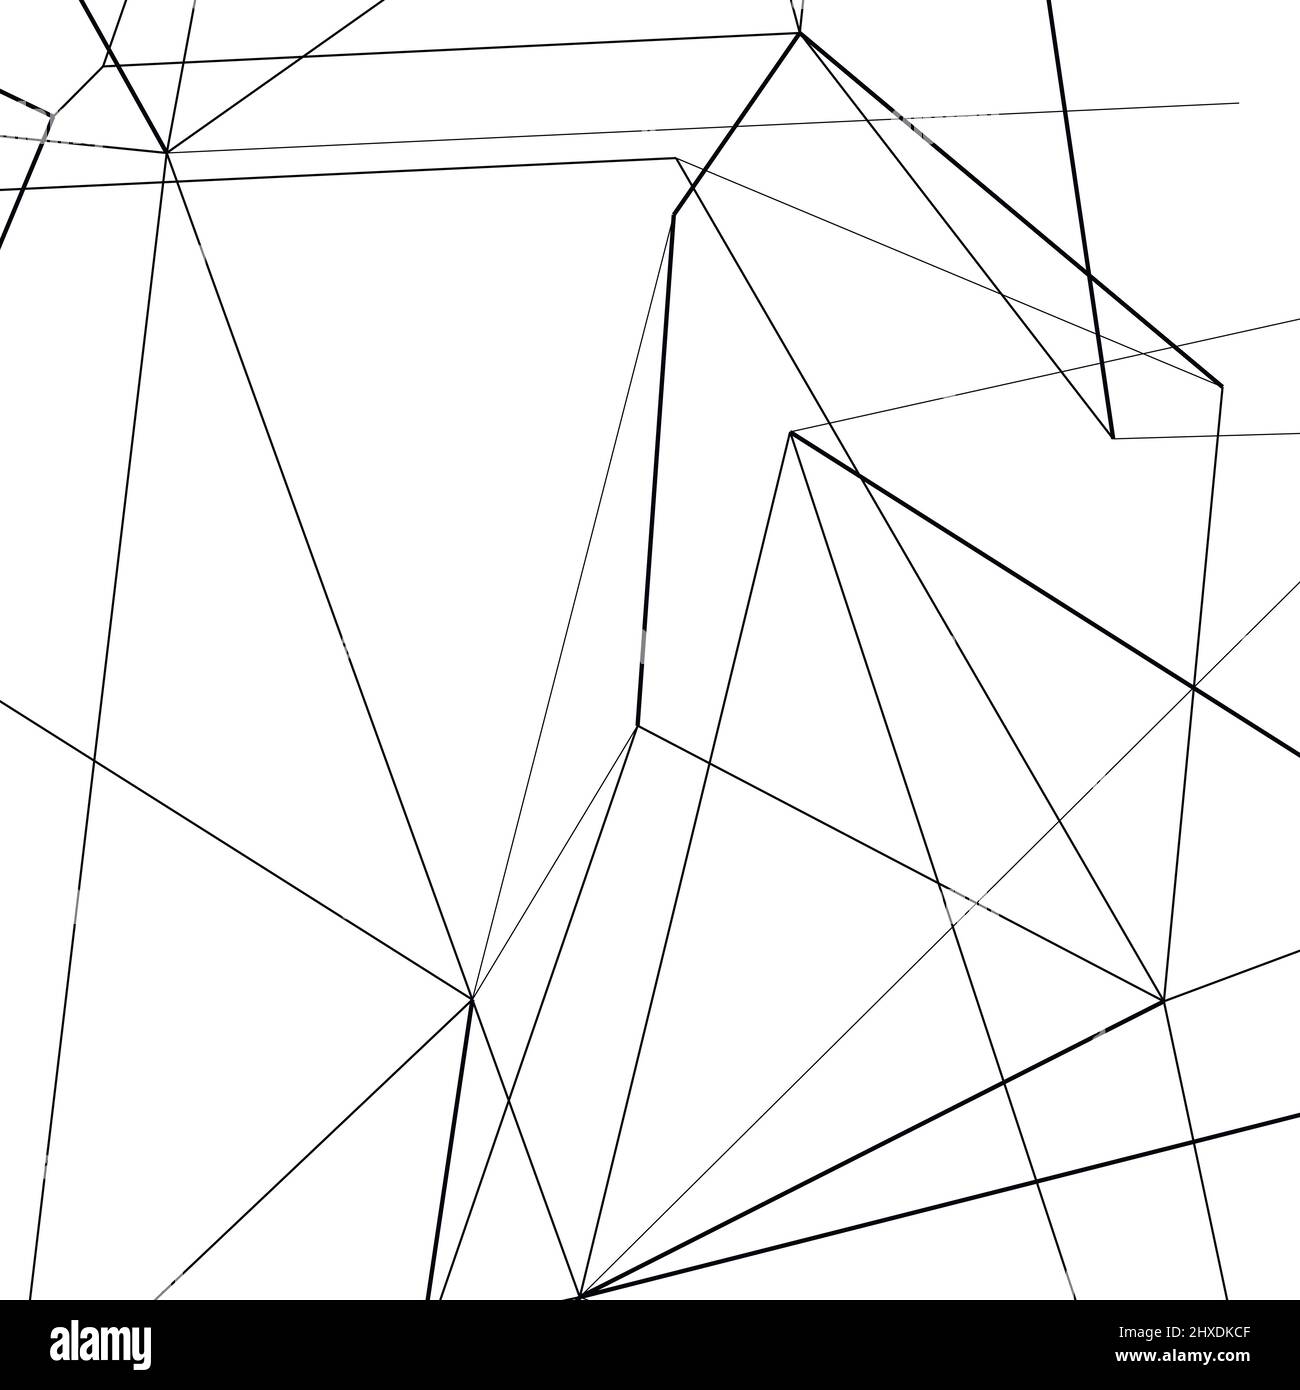 Abstract connecting and overlapping lines. Vector illustration Stock ...